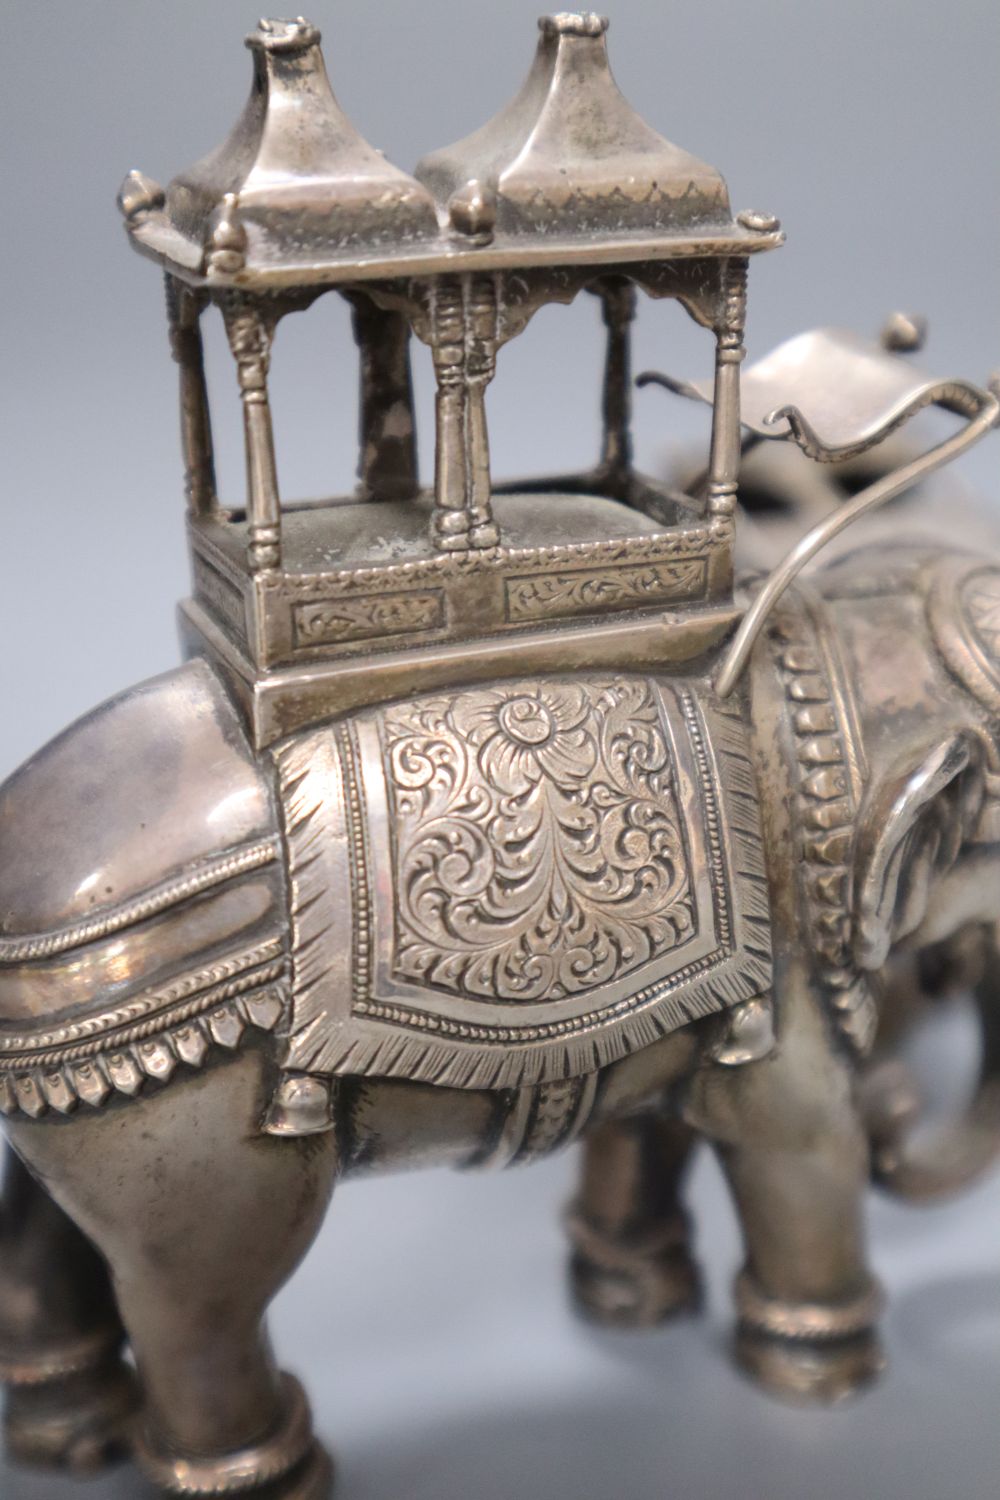 A pair of cast silver plated models of ceremonial elephants, 11cm high